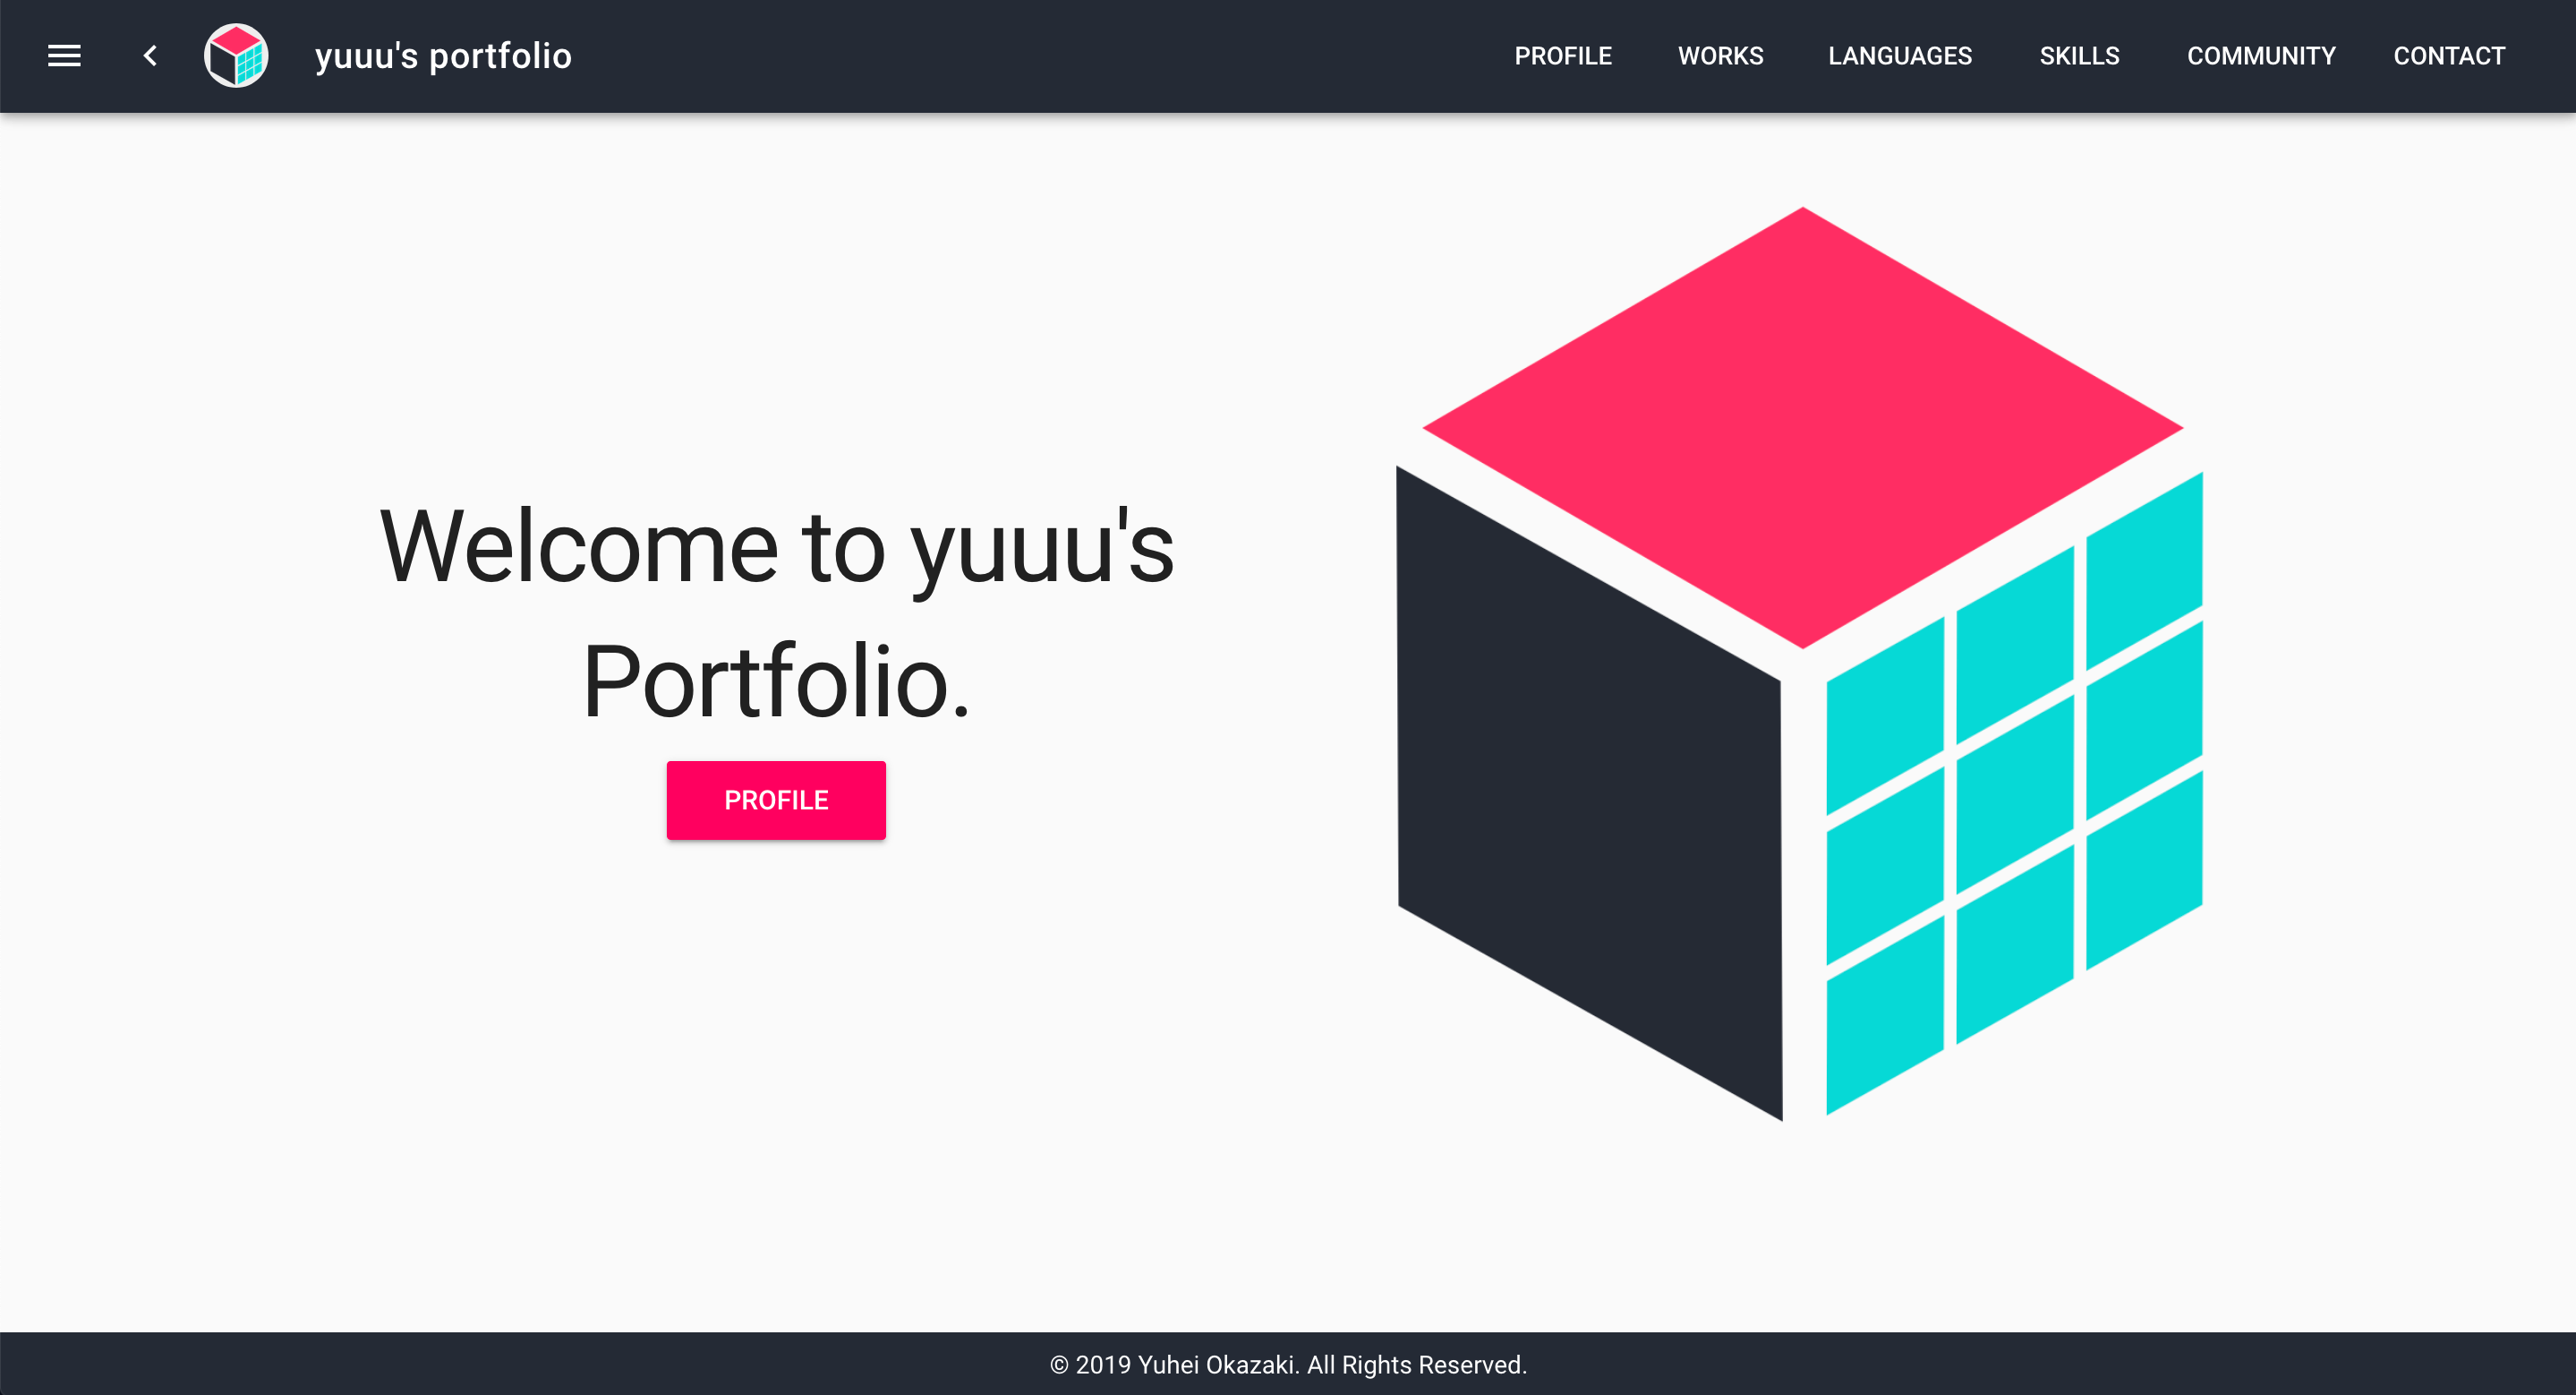 Banners_and_Alerts_と_yuuu_s_portfolio.png